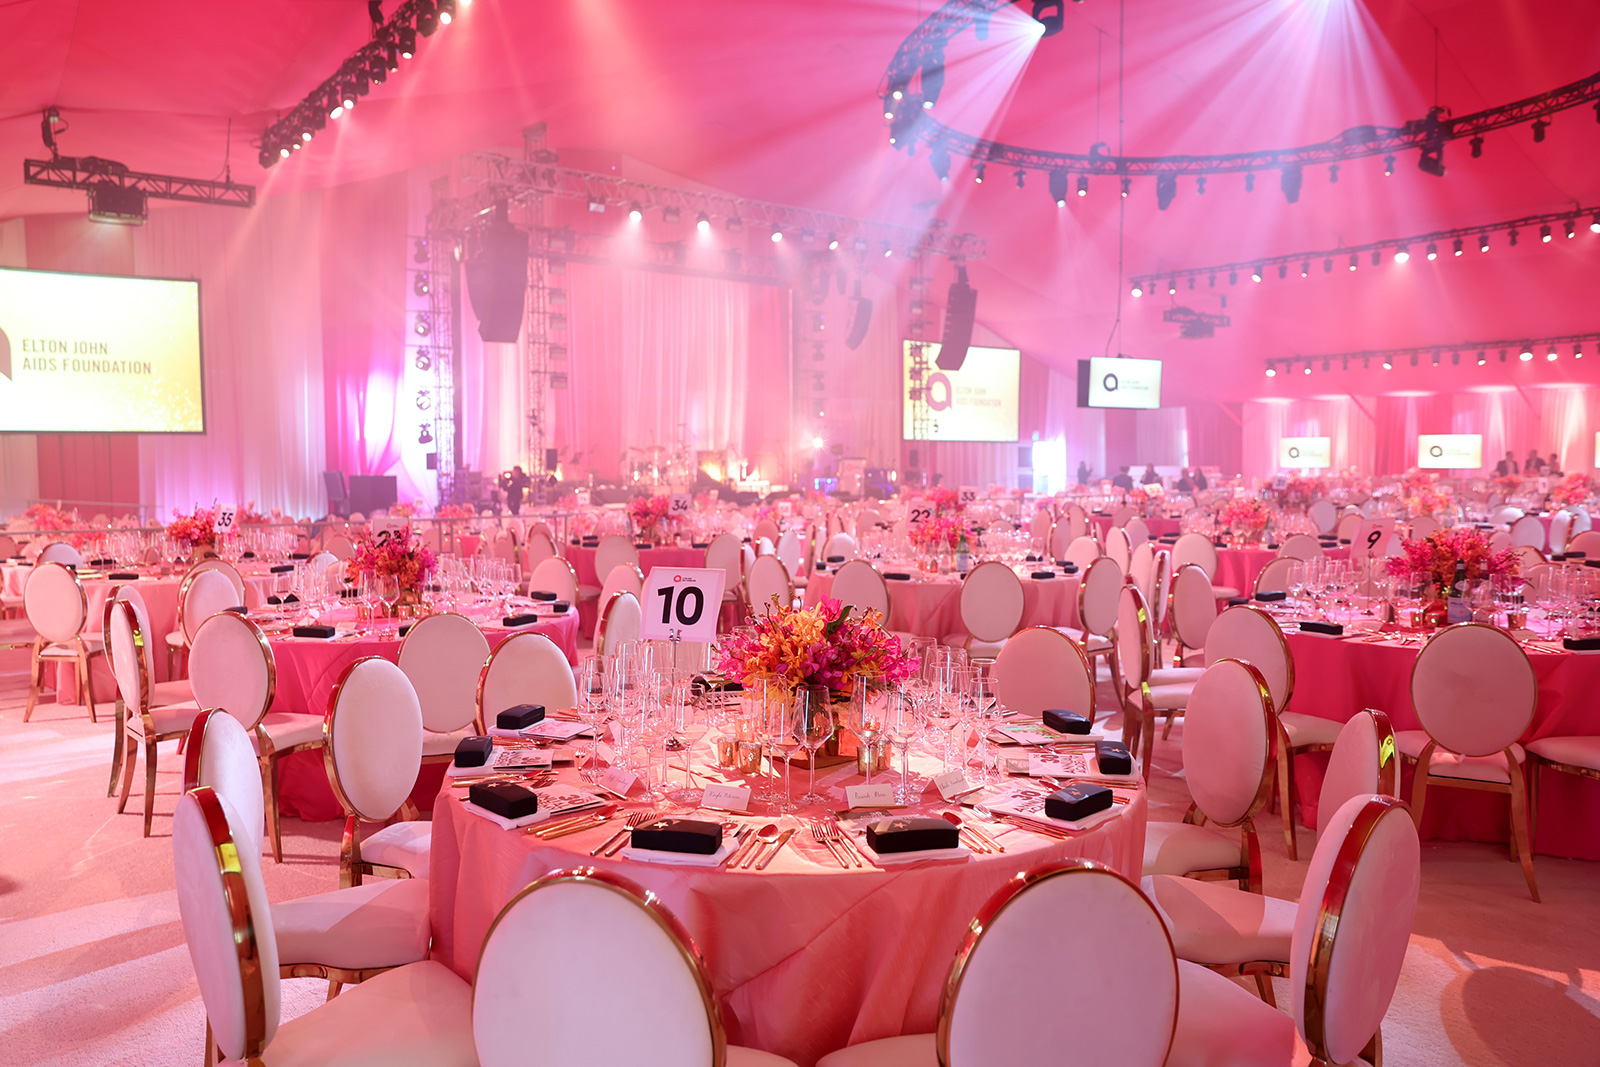 The main room of the Elton John AIDS Foundation's 30th Annual Academy Awards Viewing Party in Los Angeles on March 27.